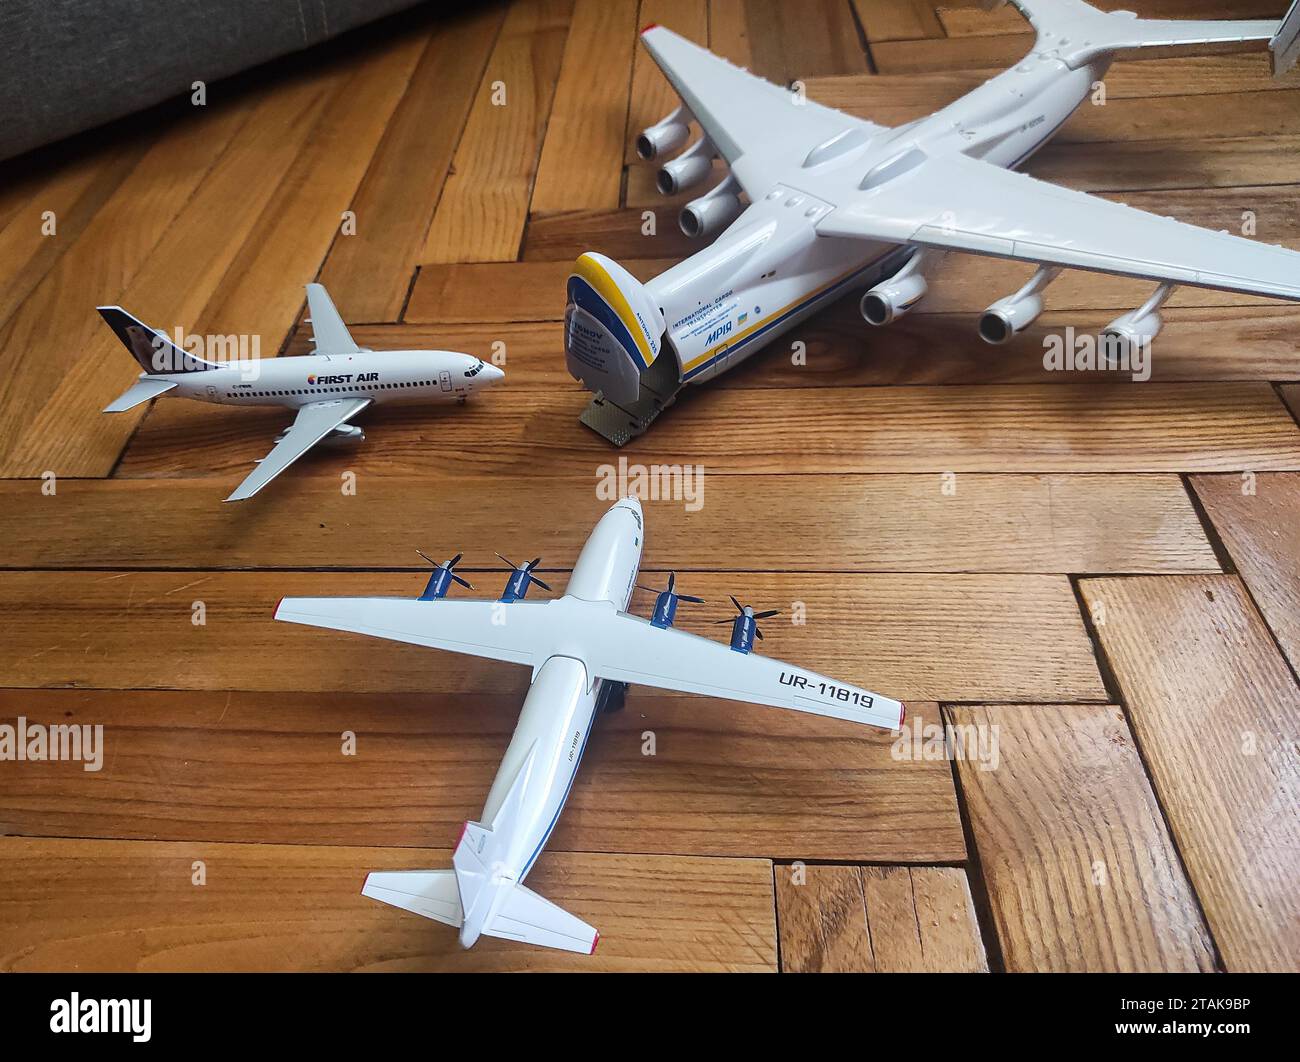 Antonov Airlines An-225, Motor Sich Antonov An-12, and First Air Boeing 737-200 aircraft models on a floor, all in 1:200 scale Stock Photo